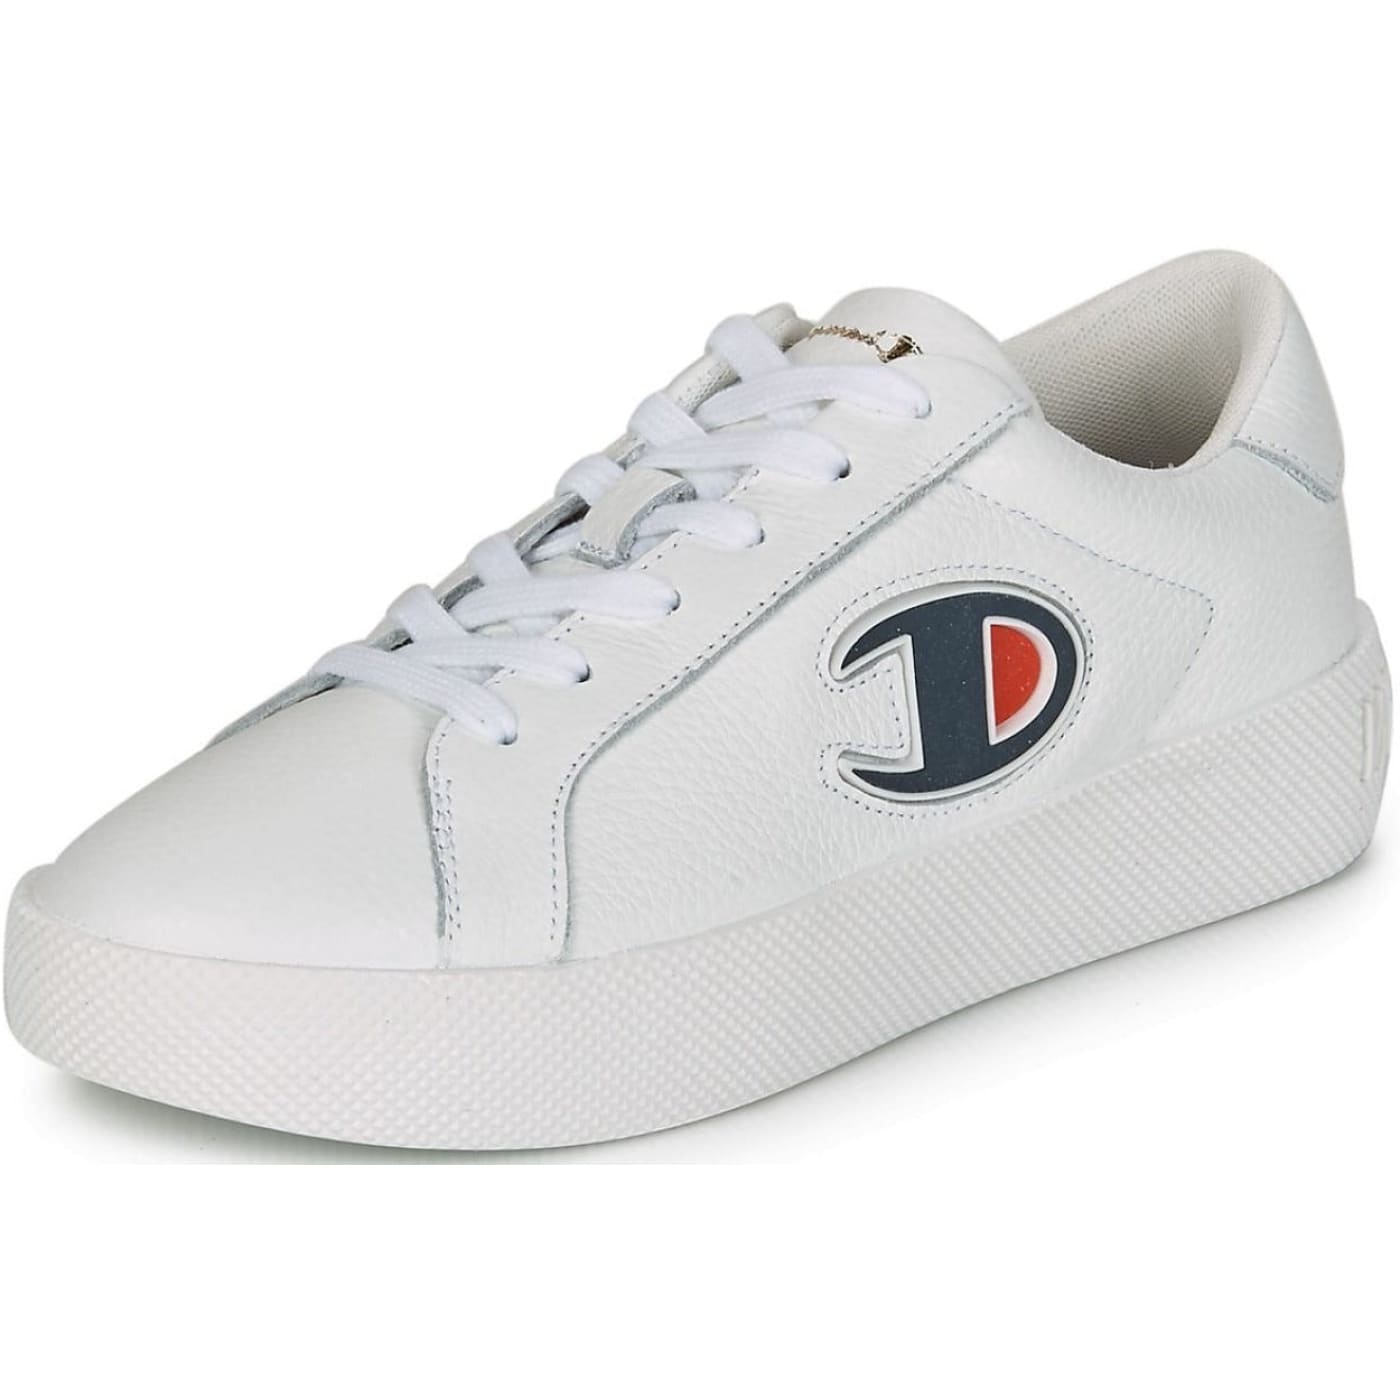 Champion Era White Leather Womens Trainers Shoes – Top Brand Shoes